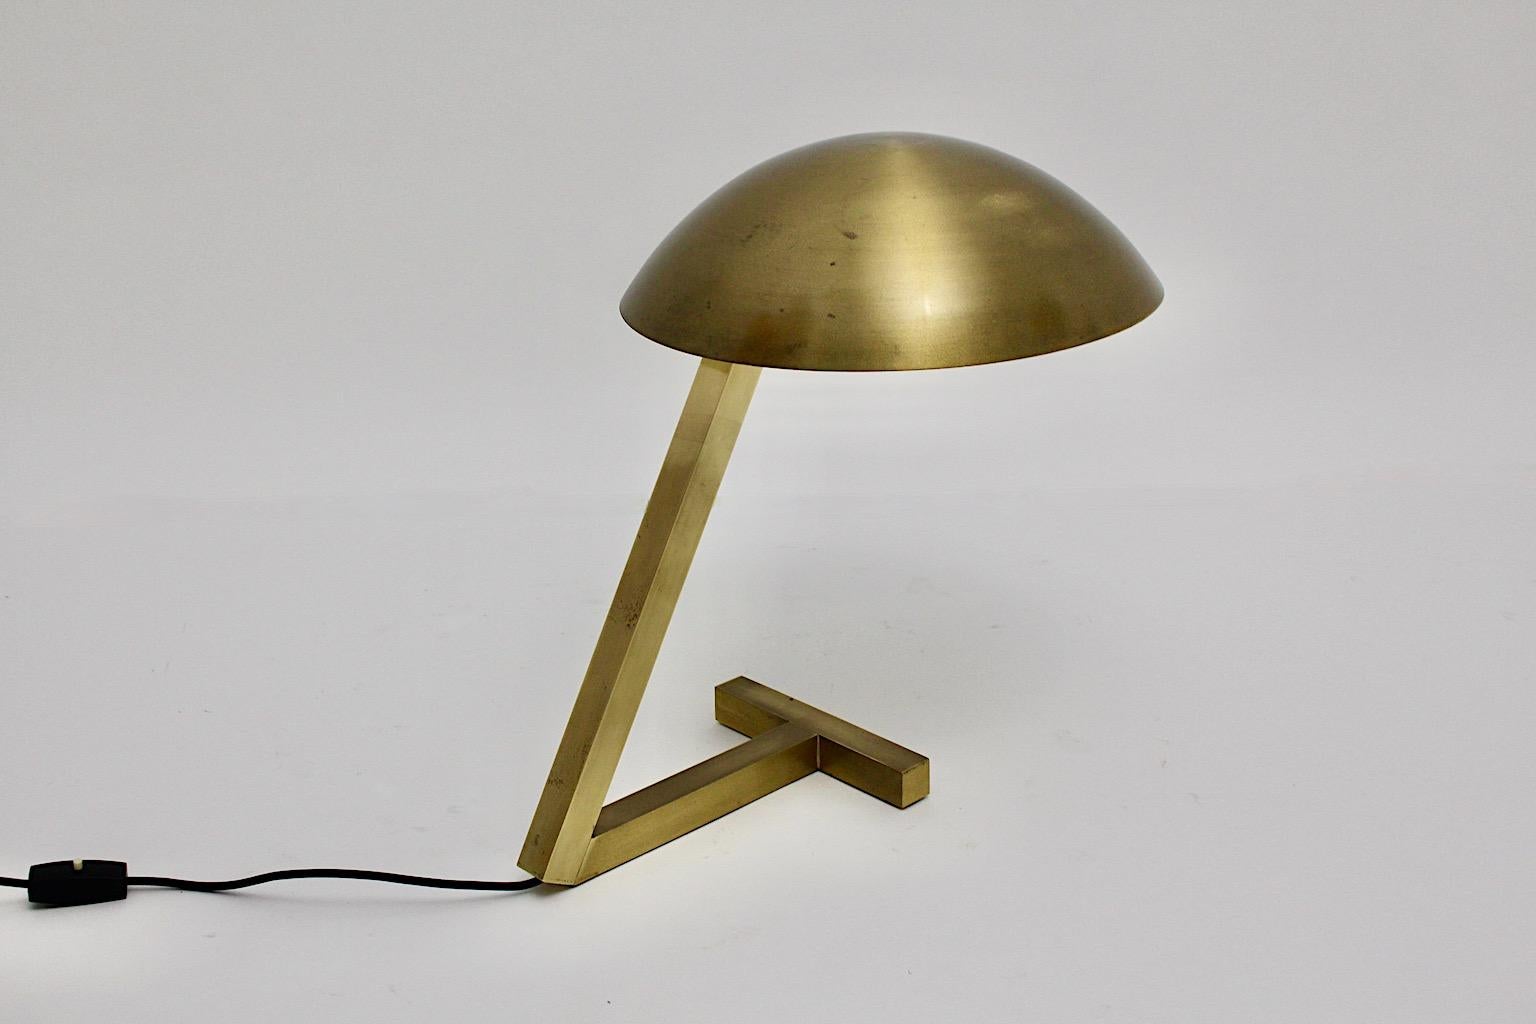 Space Age Brass Vintage Dome Geometric Table Lamp Desk Lamp 1960s Italy In Good Condition For Sale In Vienna, AT